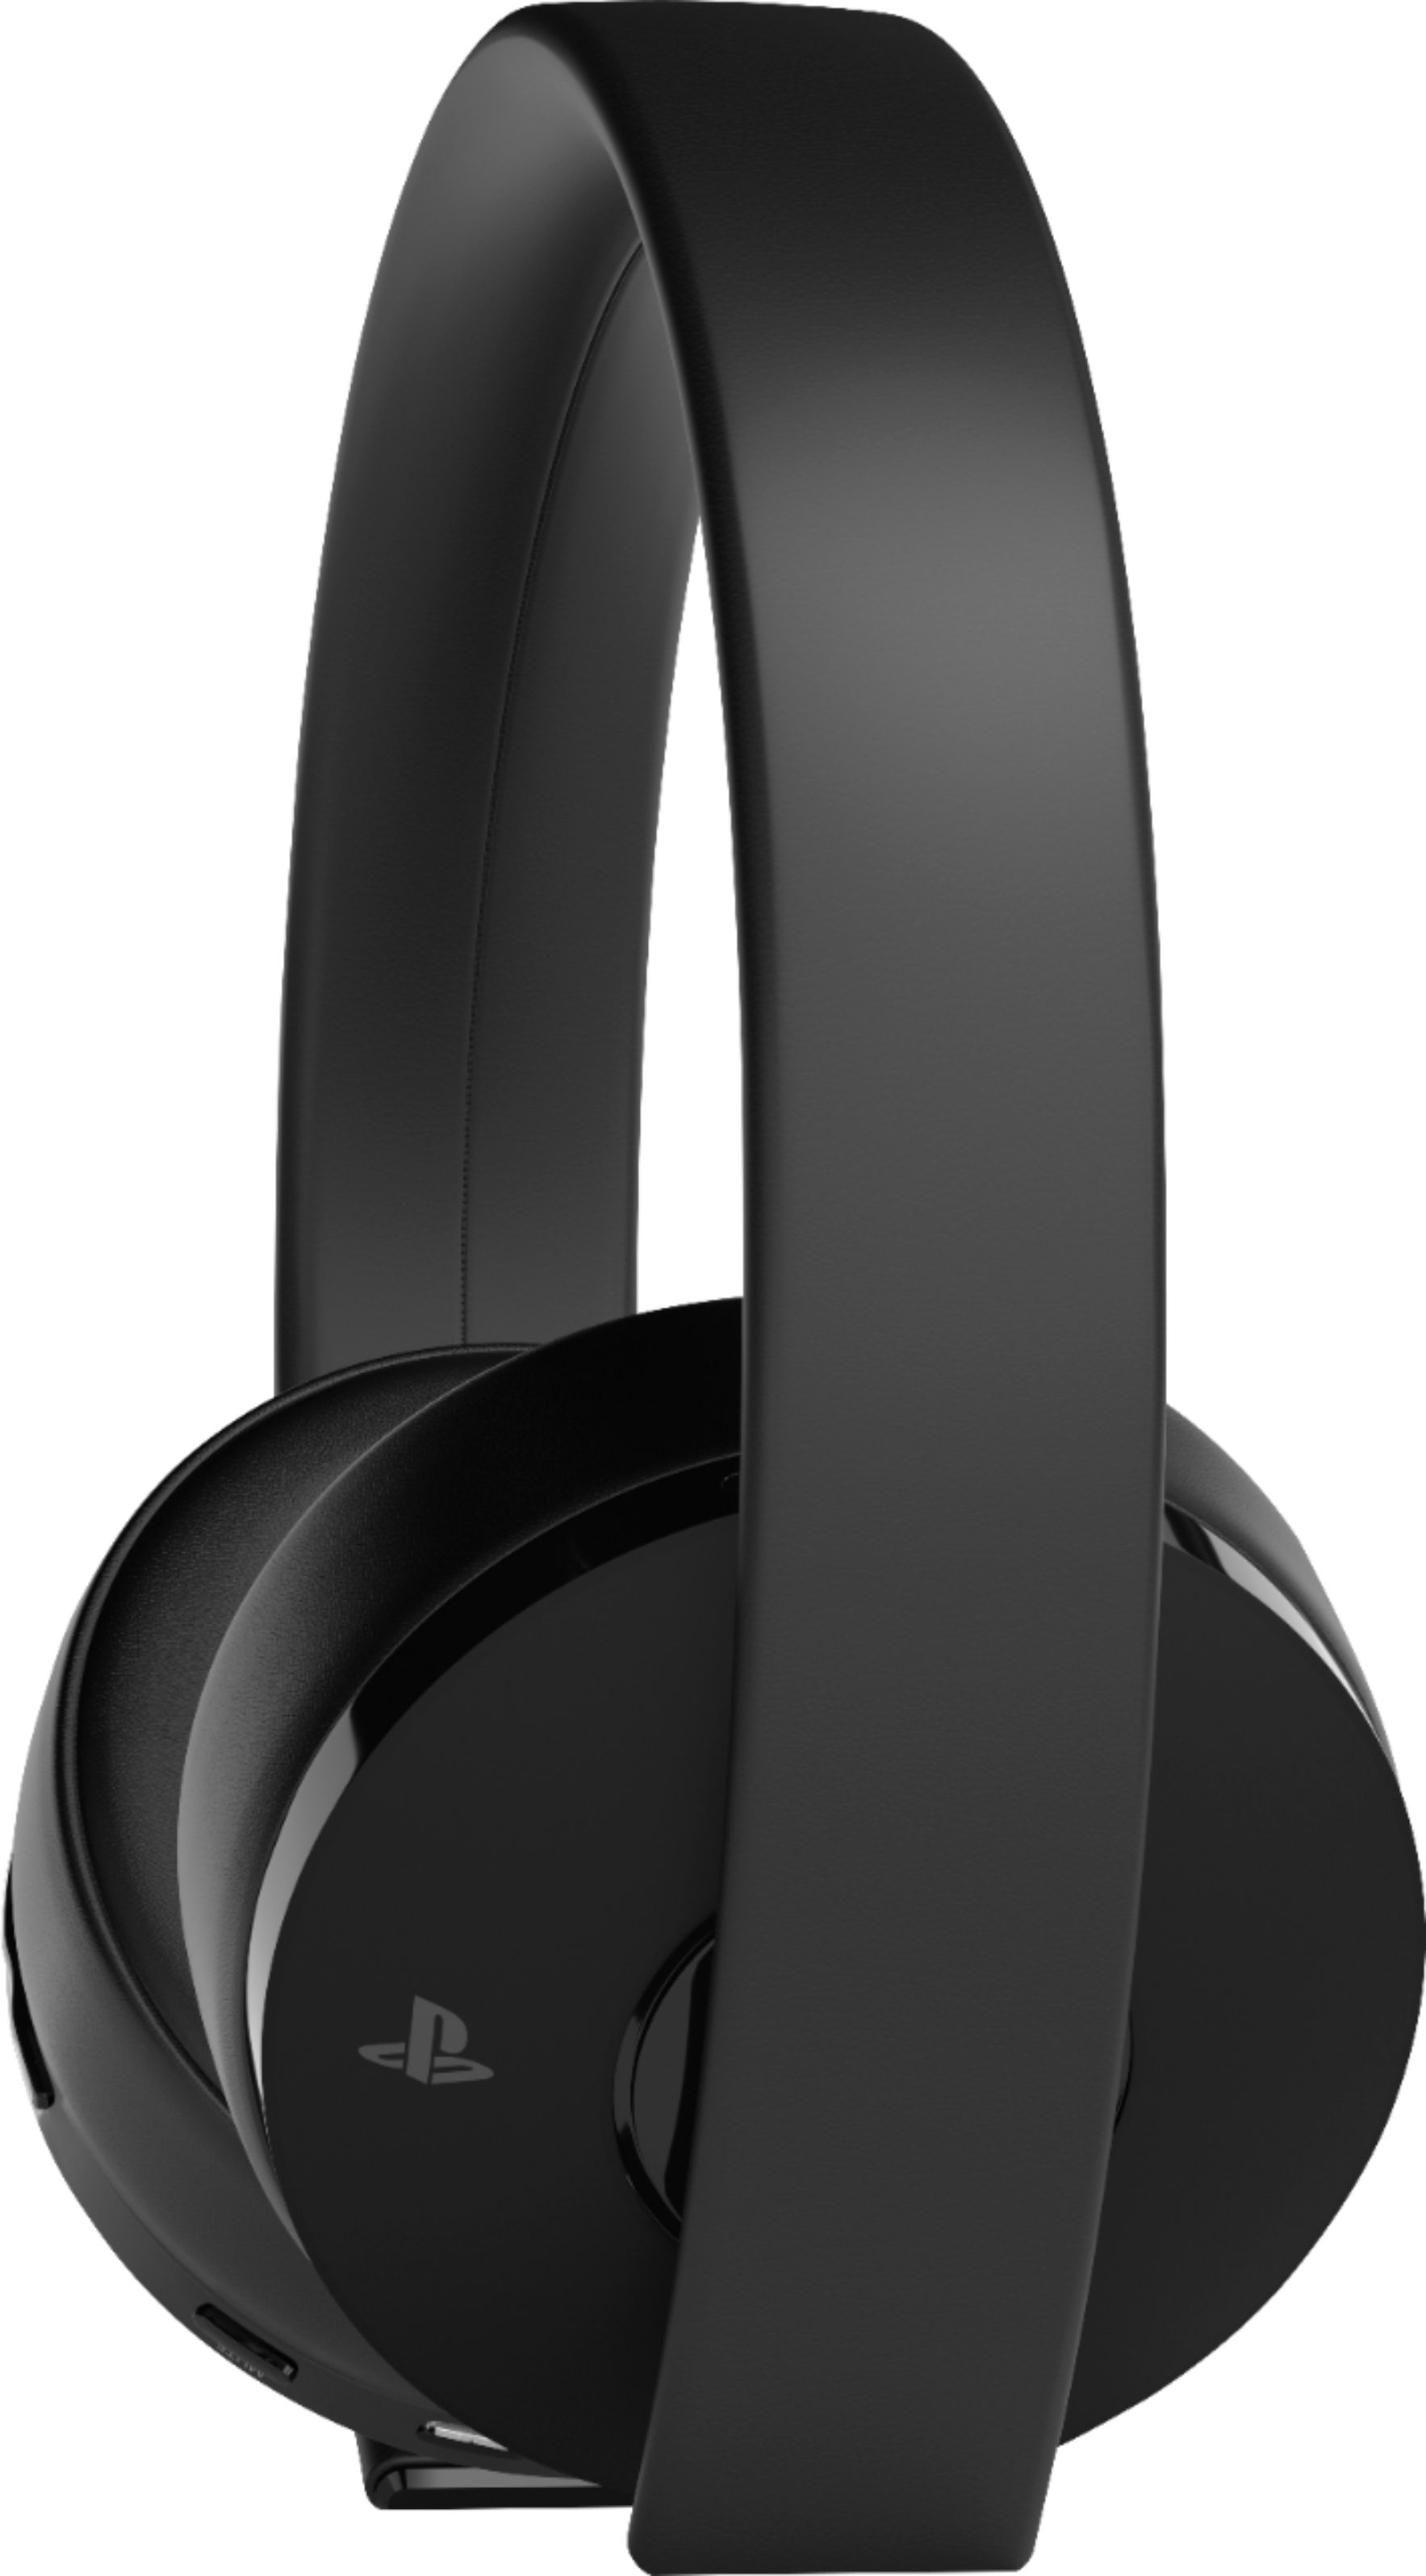 ps4 gold headset black